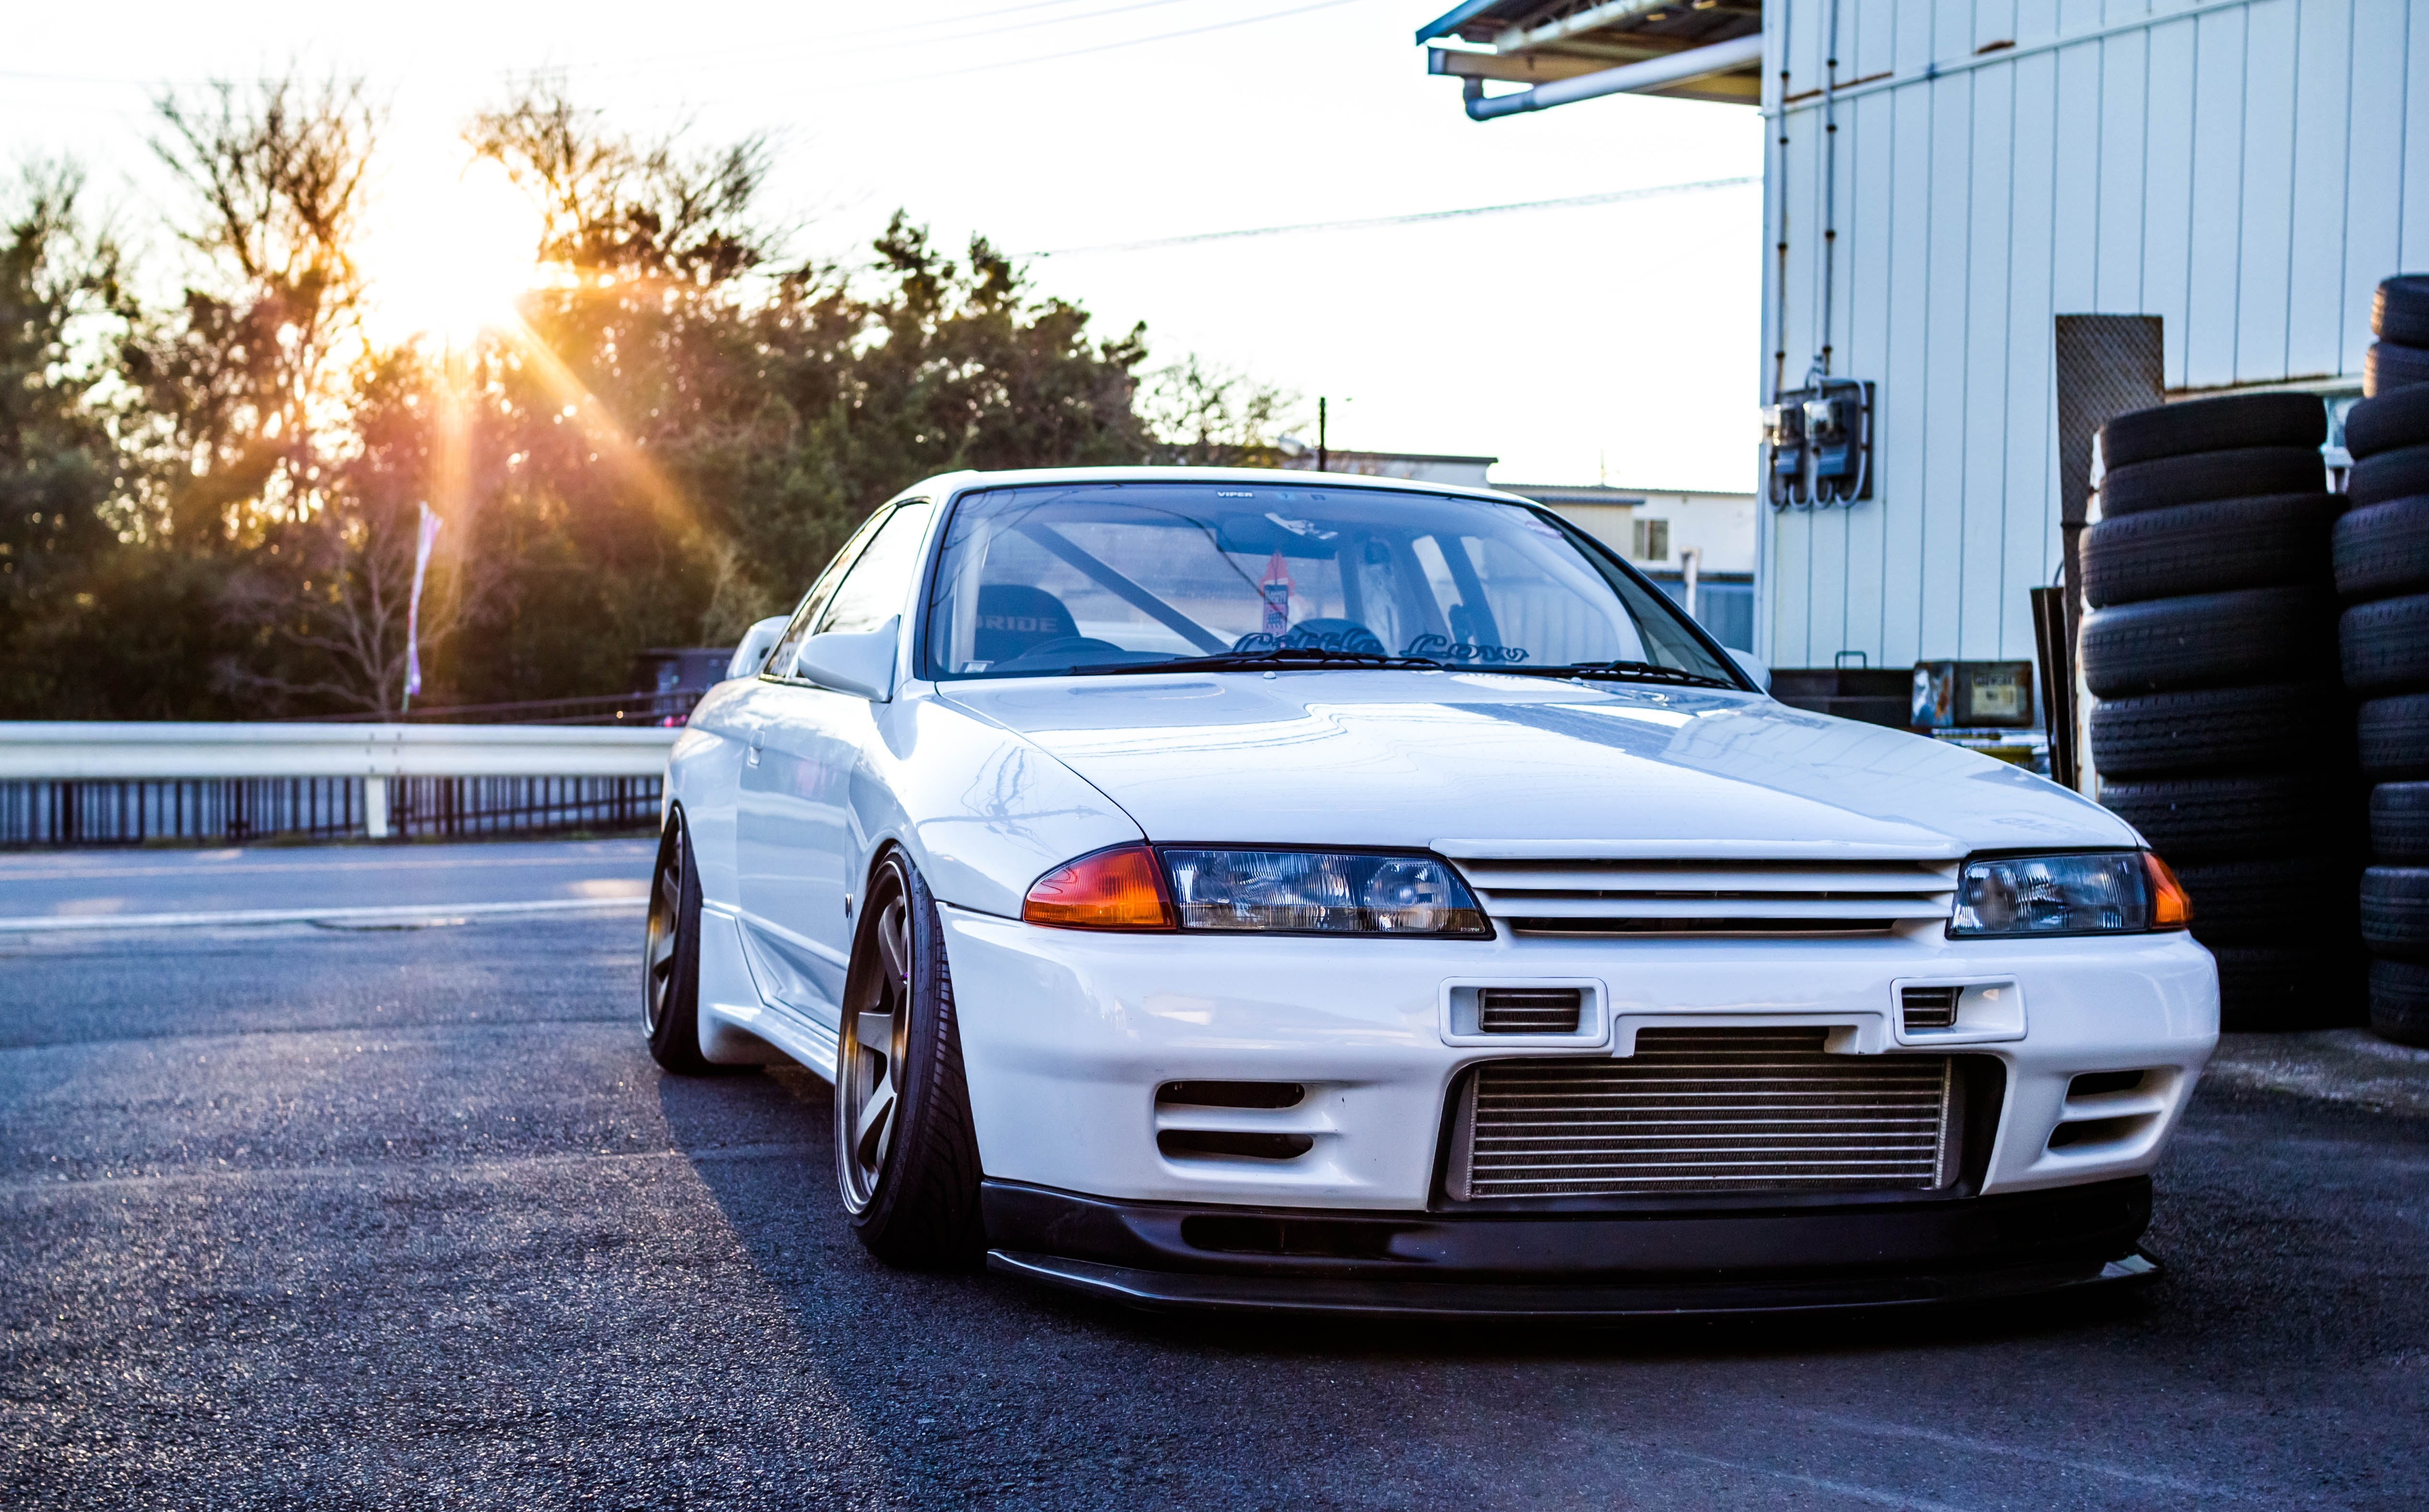 r32, gtr, skyline, nissan, cars, white, front view